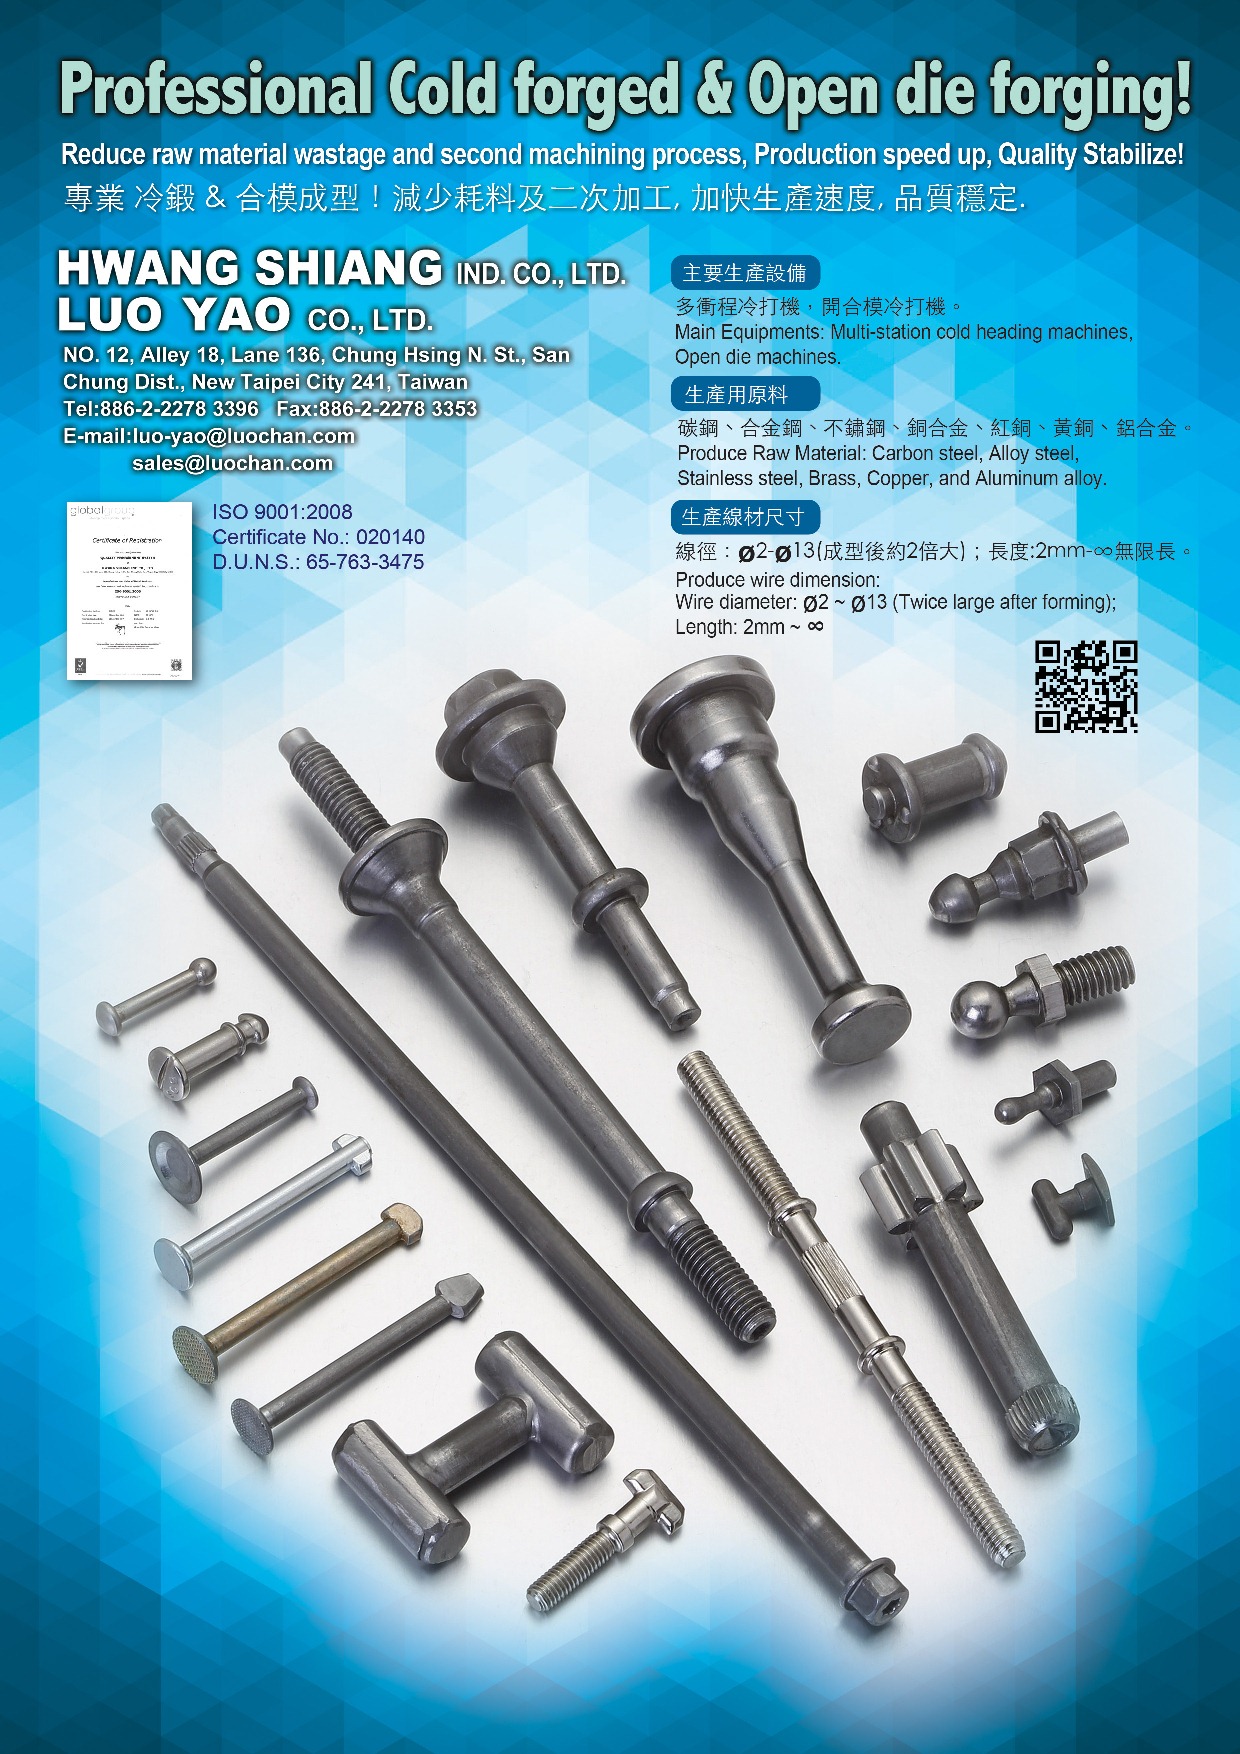 LUO YAO CO., LTD. / Hwang Shiang Ind. Co., Ltd. , Cold Forged, Open Die Forging , Special Cold / Hot Forming Parts